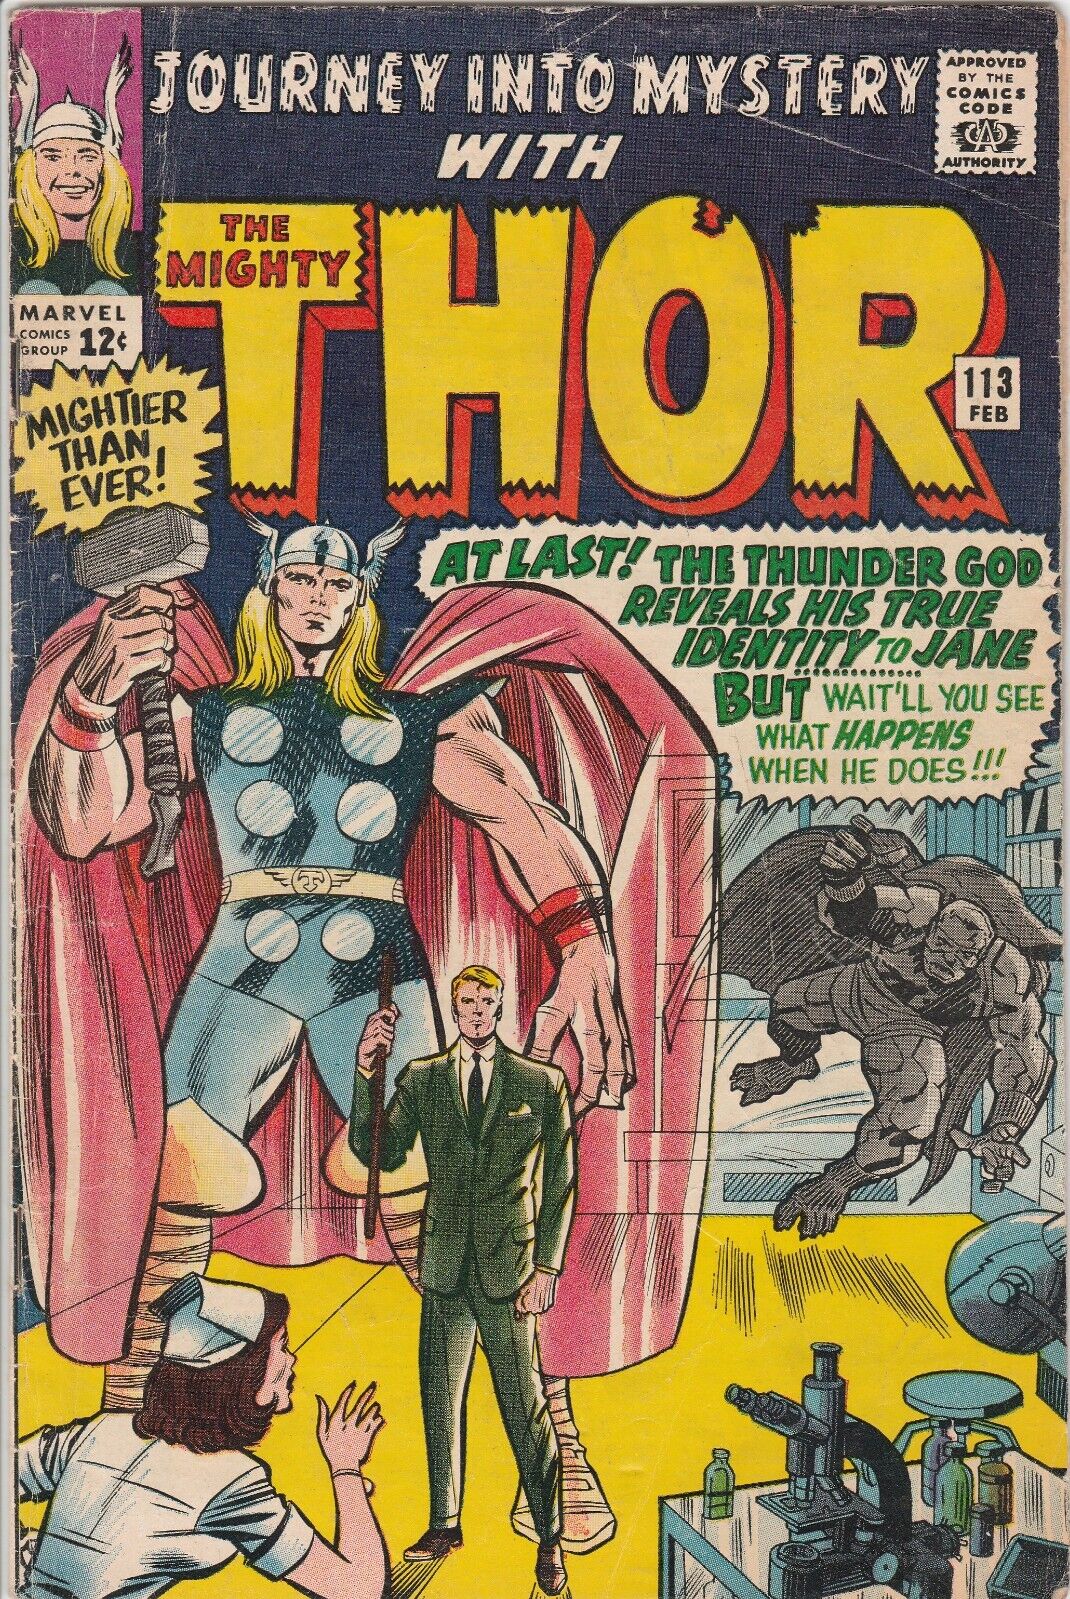 Marvel Comics 1965, Journey Into Mystery, The Mighty Thor #113 GD